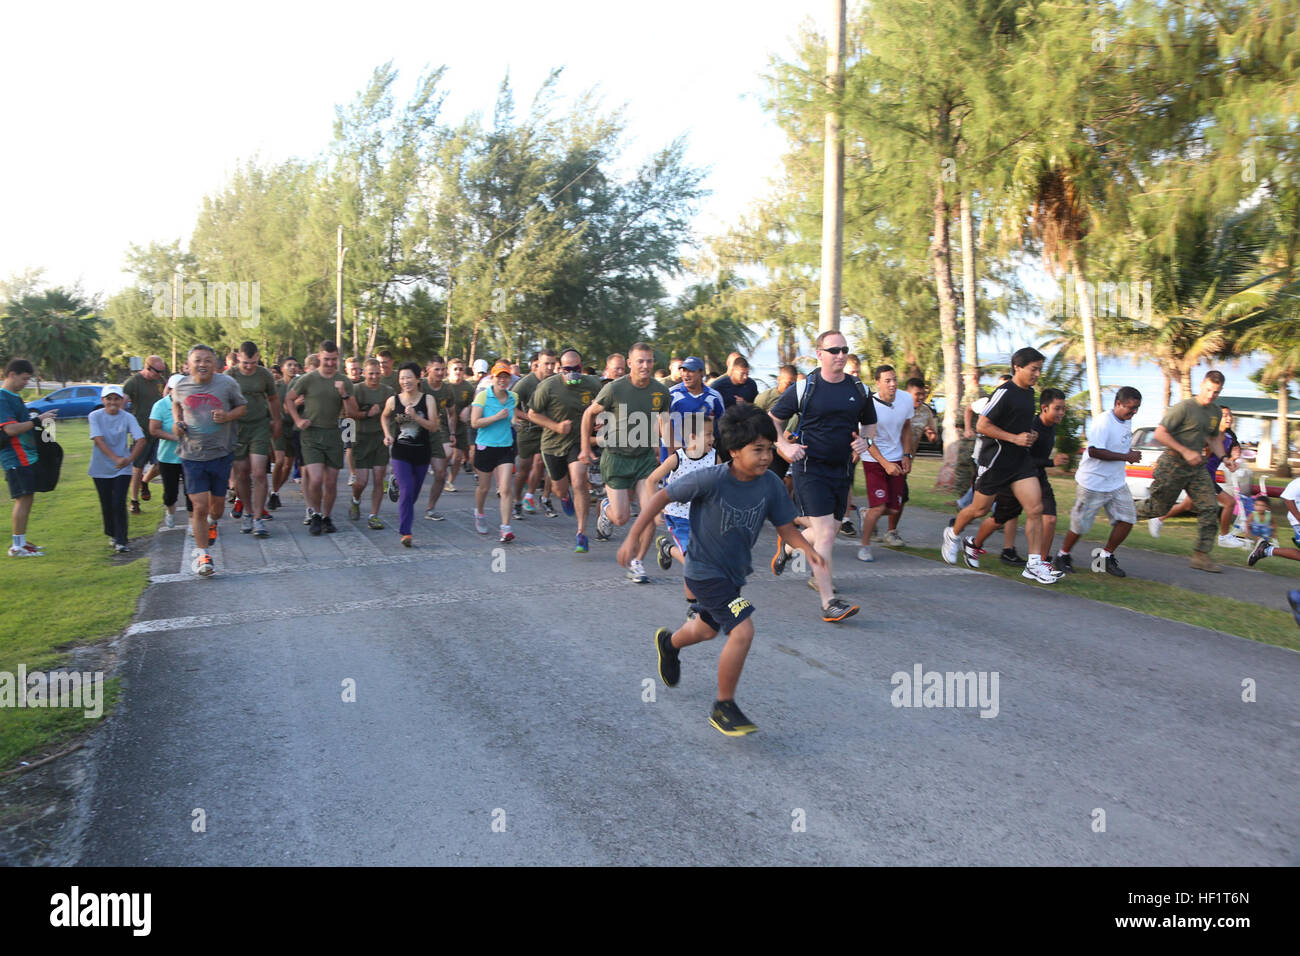 Participants in the 2nd Tinian Hafa Adai 5 kilometer run take off sprinting Nov. 30, after the start buzzer rang. More than 120 runners participated in the event with Marines, sailors and locals running together. The Marines are with Marine Wing Support Squadron 171, Marine Aircraft Group 12, 1st Marine Aircraft Wing, III Marine Expeditionary Force. The service members currently on Tinian participating in Exercise Forager Fury II, which is a joint exercise, designed to employ and assess combat power generation in a deployed and austere environment. (U.S. Marine Photo by Cpl. J. Gage Karwick/Re Stock Photo